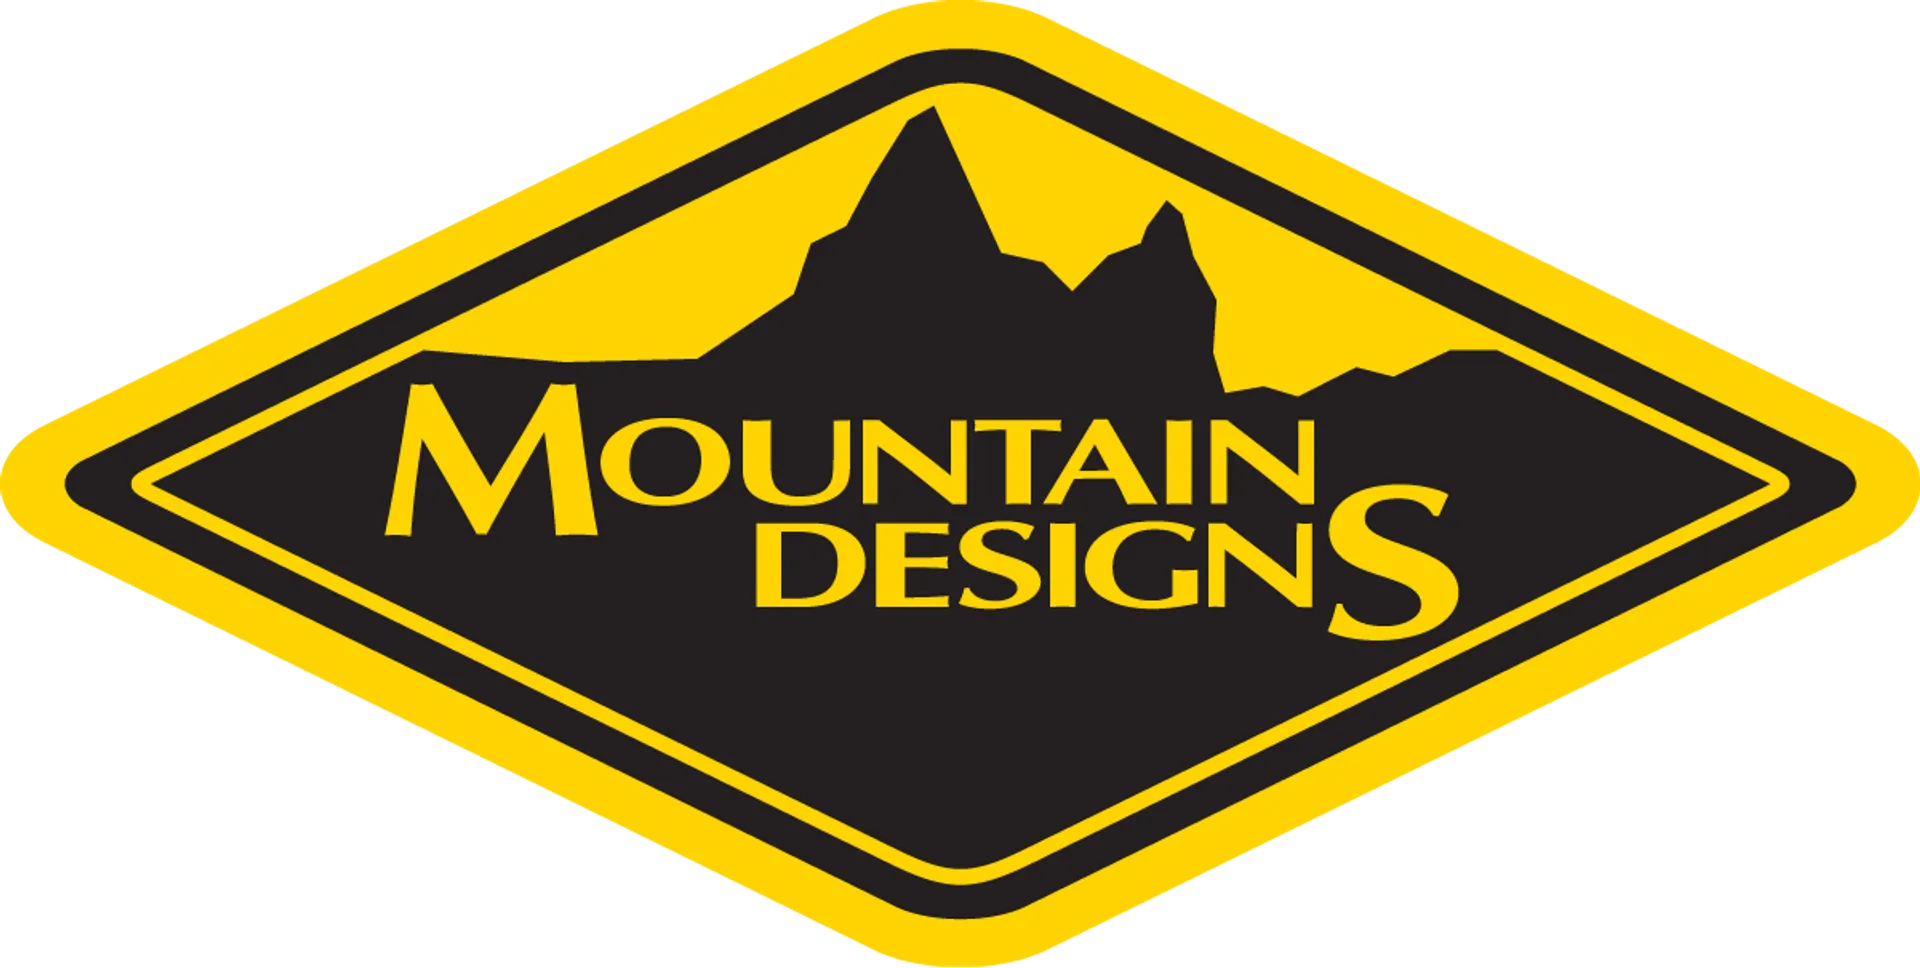 MOUNTAIN DESIGNS logo of current flyer